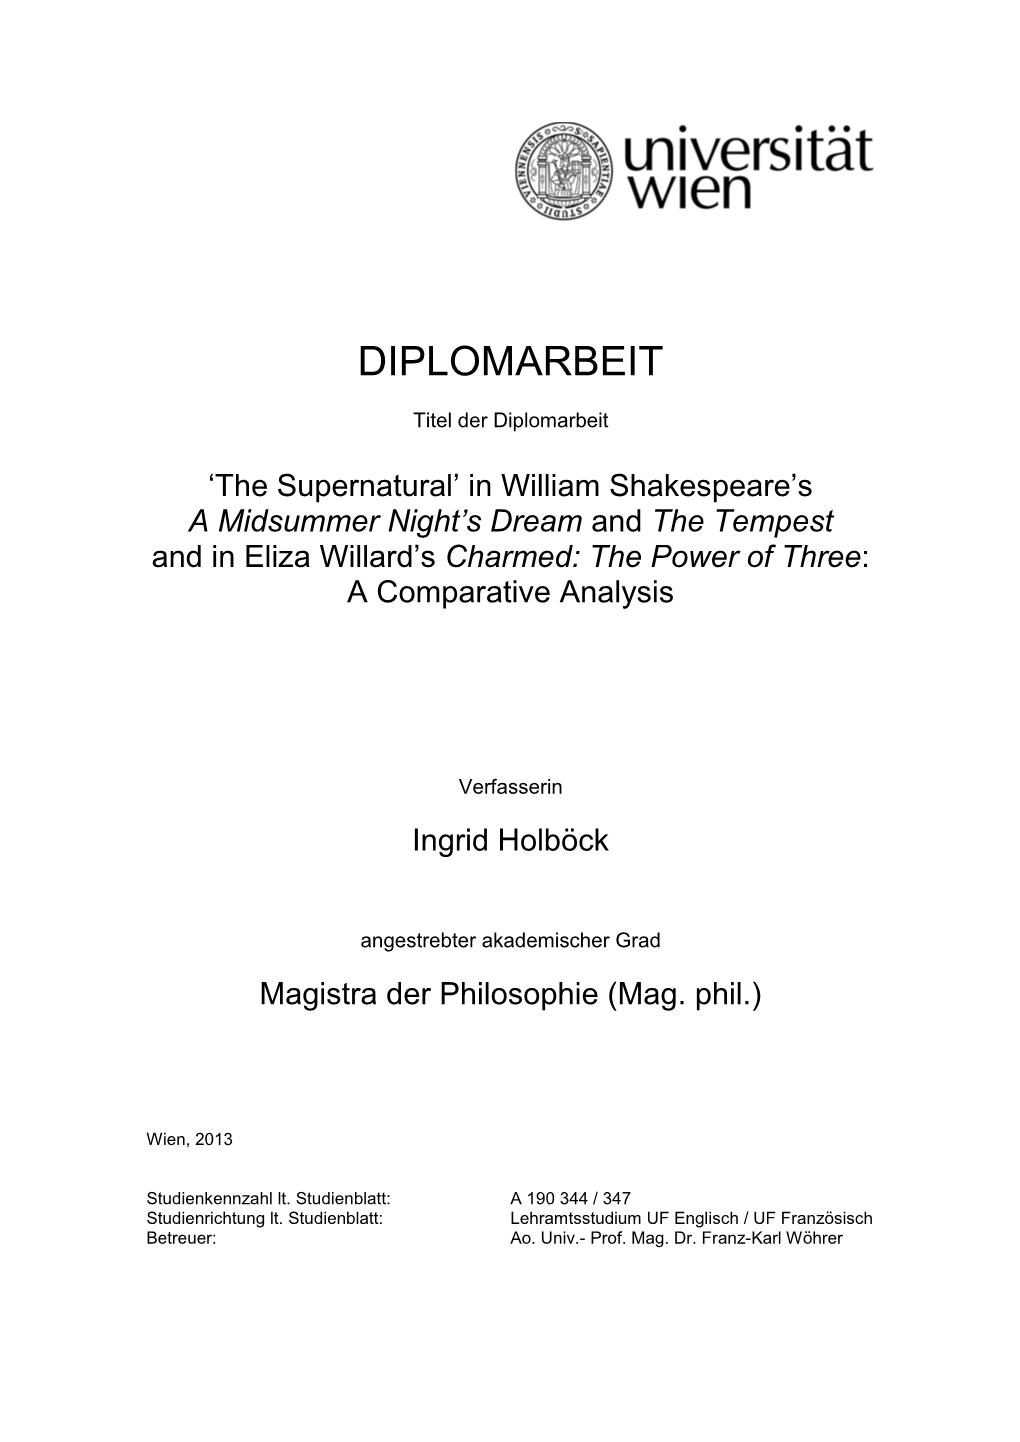 Charmed: the Power of Three: a Comparative Analysis